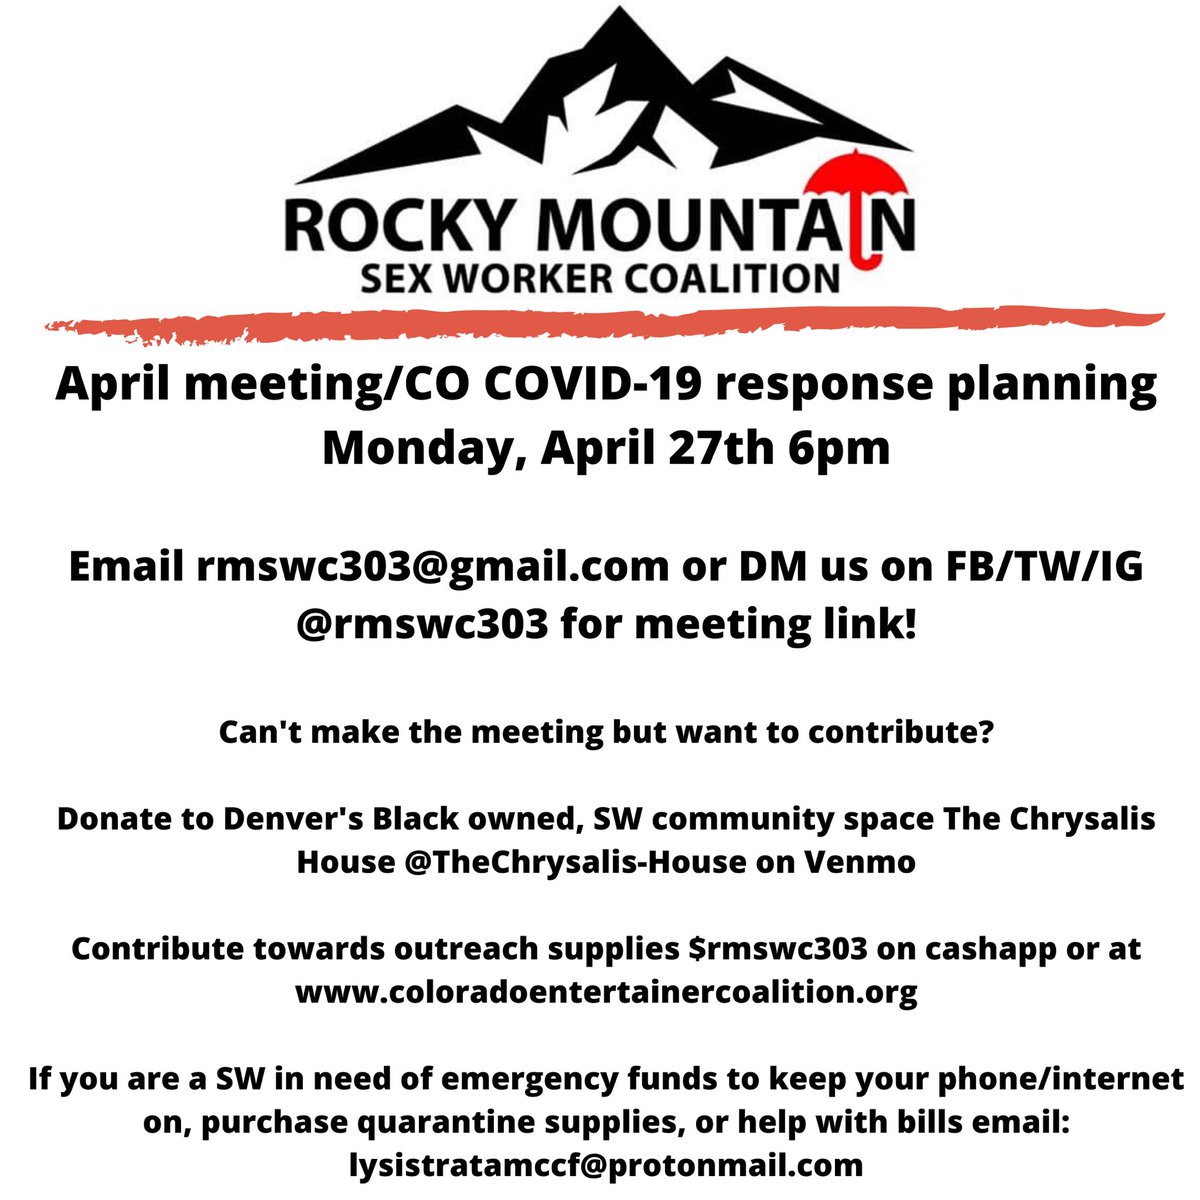 We’re going to be talking fundraising, revamping outreach, and building longer term relationships with our street based community! 

#mutualaid2020 #covid19colorado #sexworkersunite #supportyourlocalsexworkers